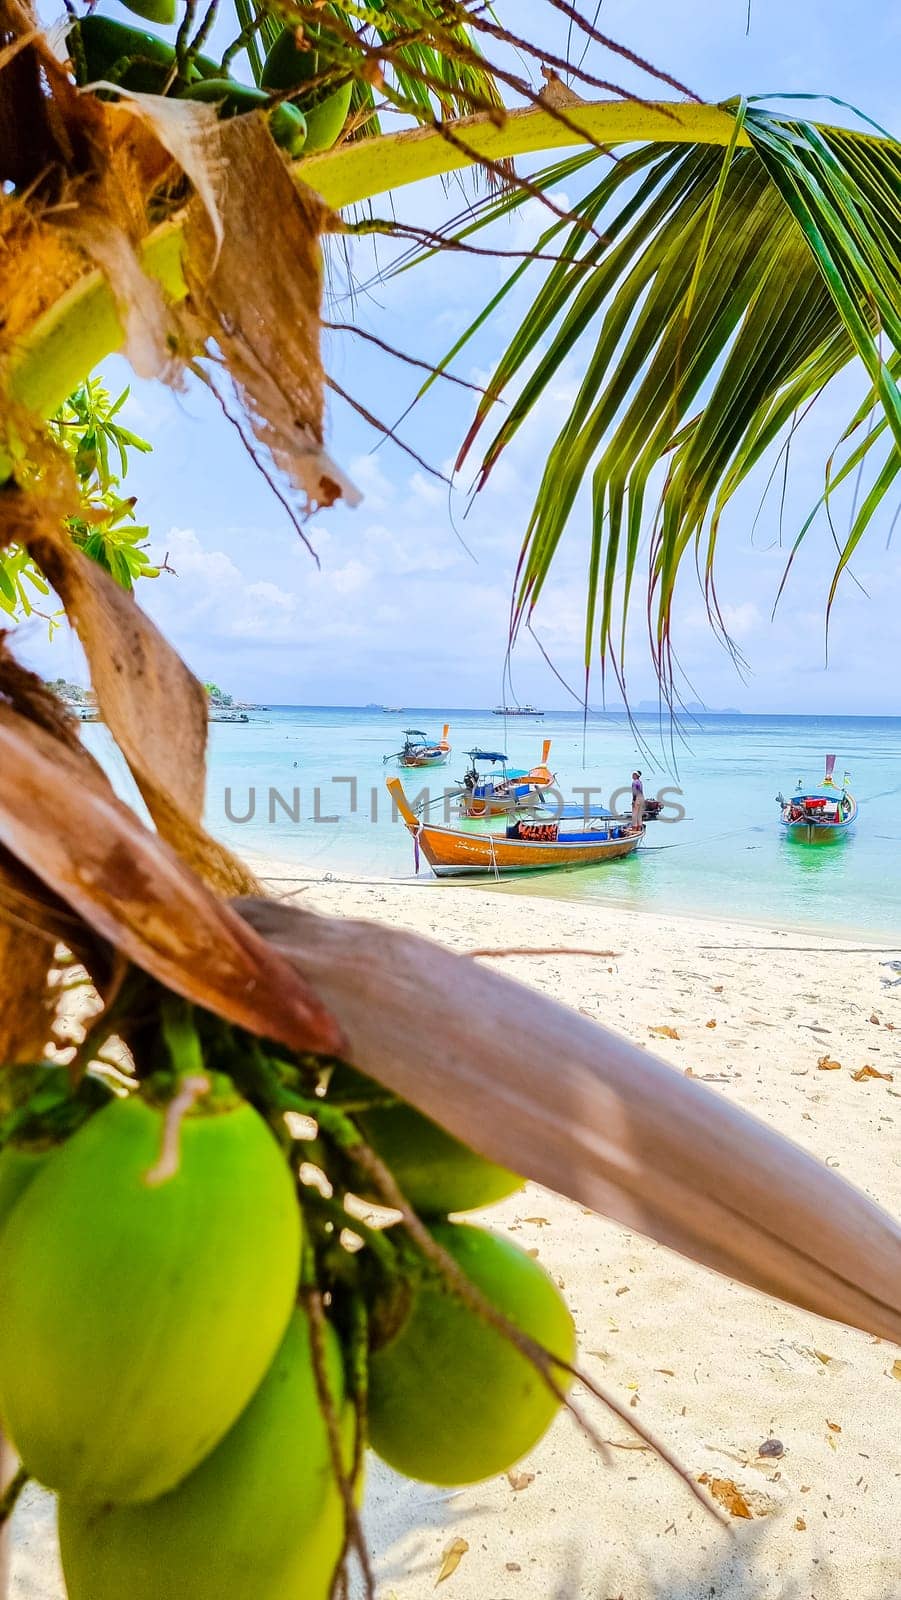 Longtail boats in the blue ocean of Koh Lipe Island Southern Thailand